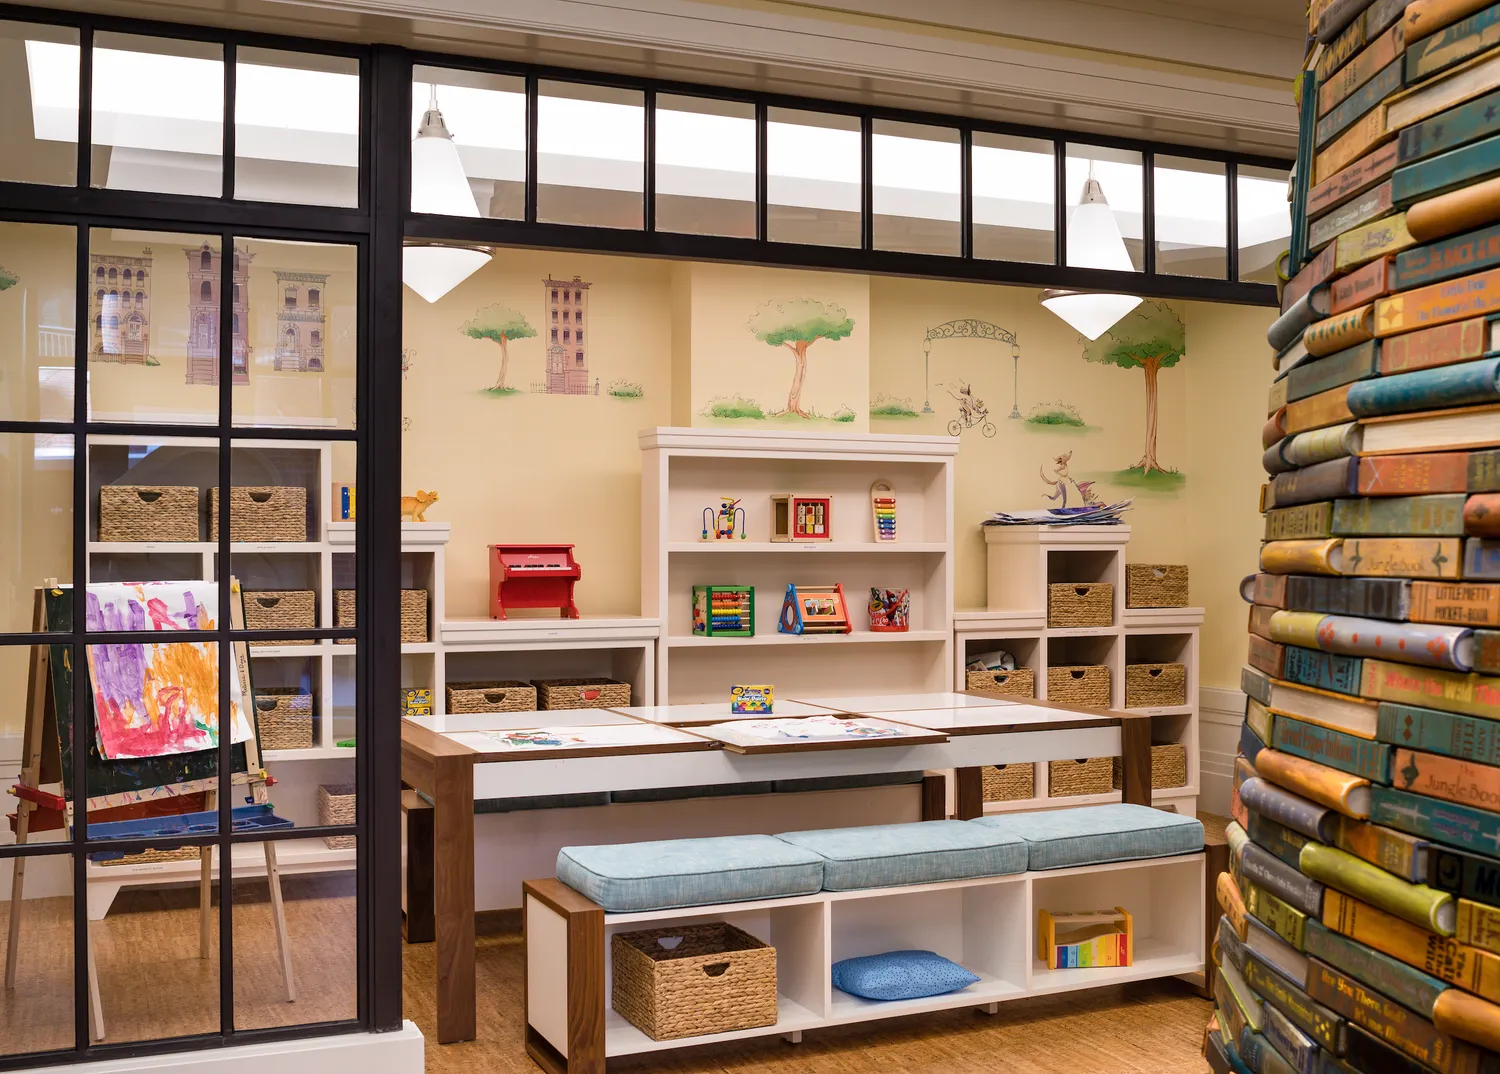 Children's playroom designed by Roto